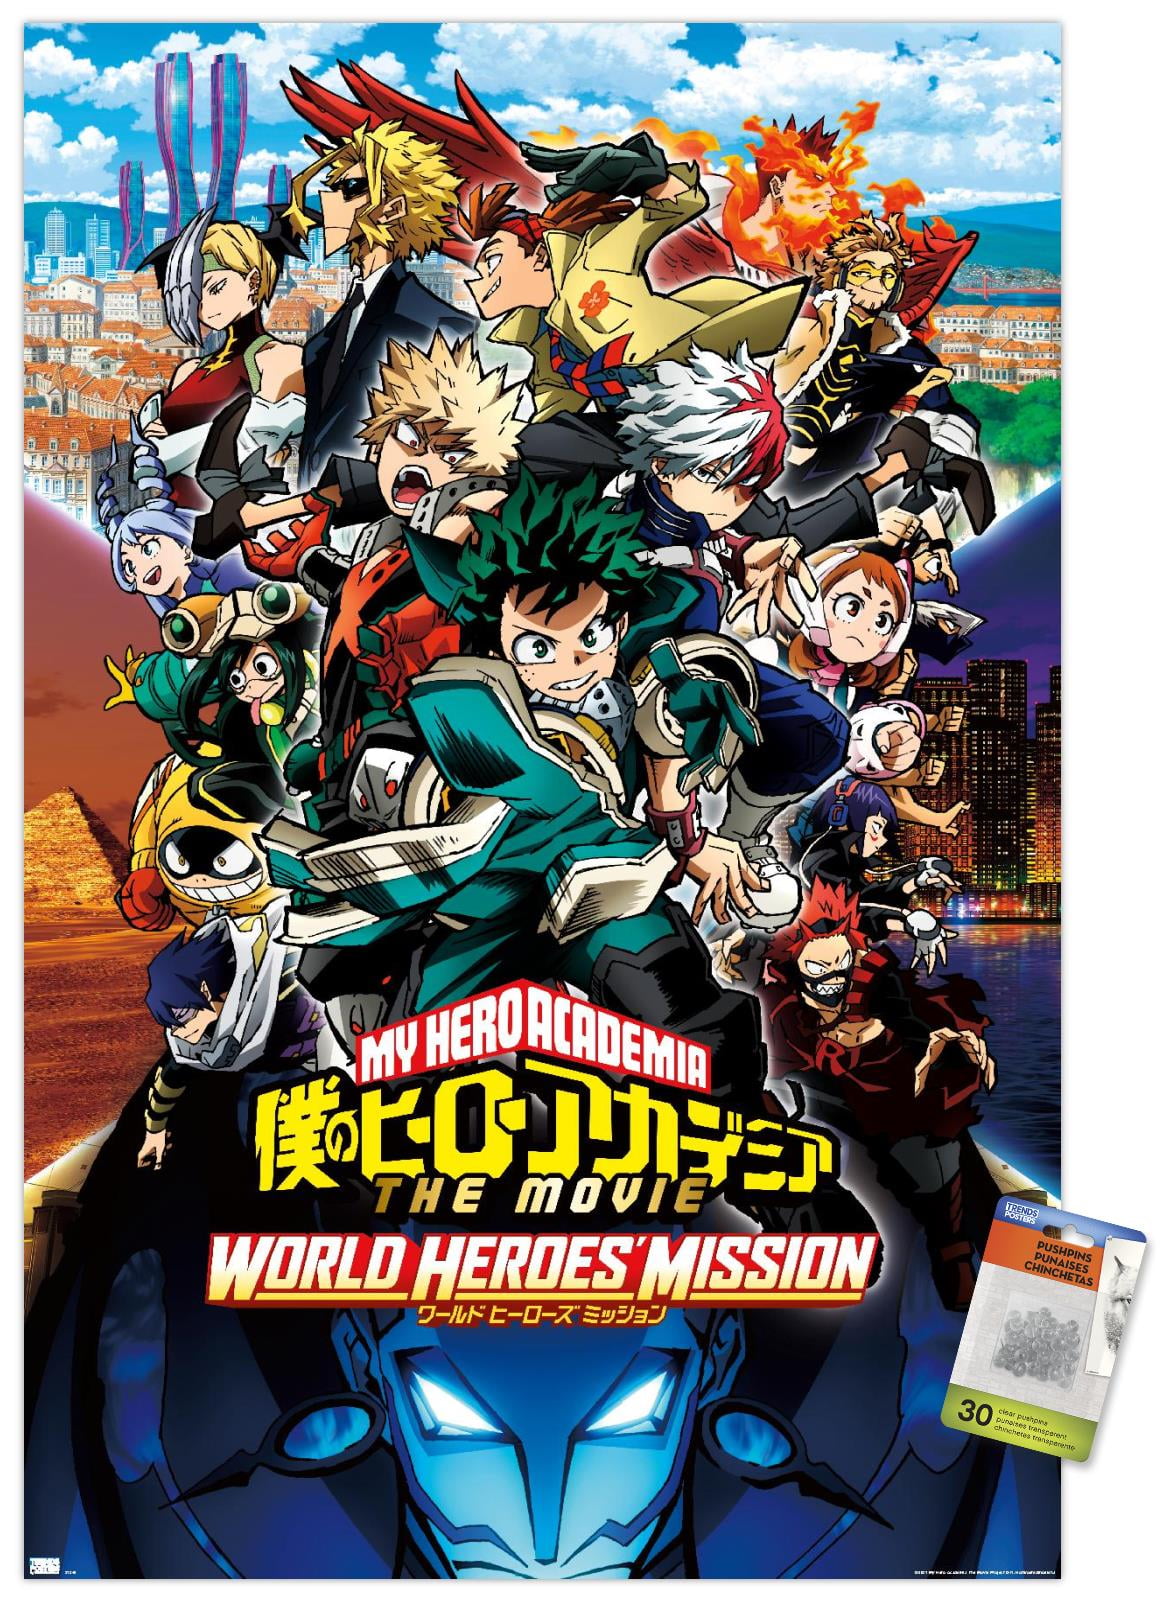 My Hero Academia - Comic Wall Poster with Pushpins, 22.375 x 34